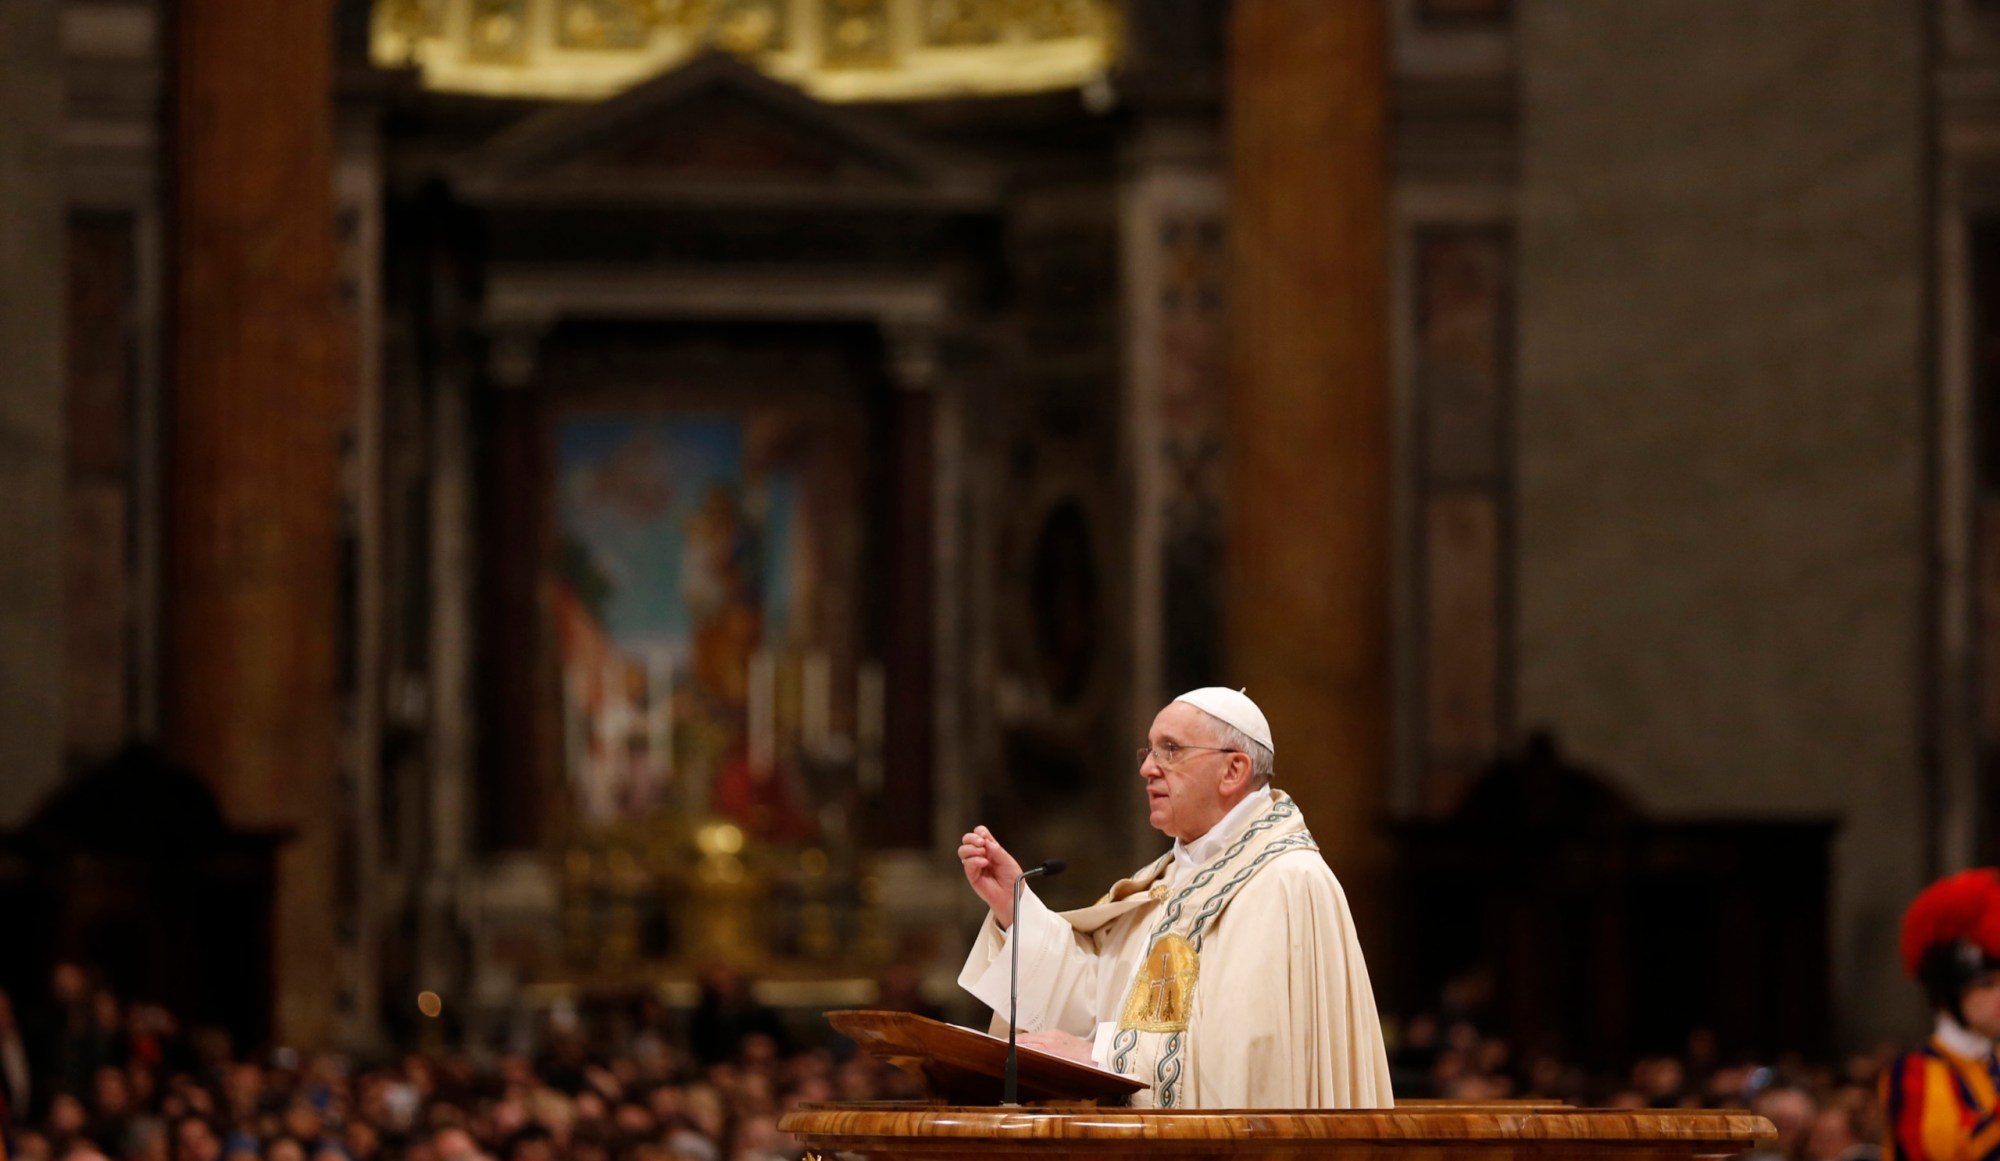 Pope Francis speaks at a New Year's Eve vespers service in St. Peter's Basilica on December 31, 2013. (AP/Alessandra Tarantino)